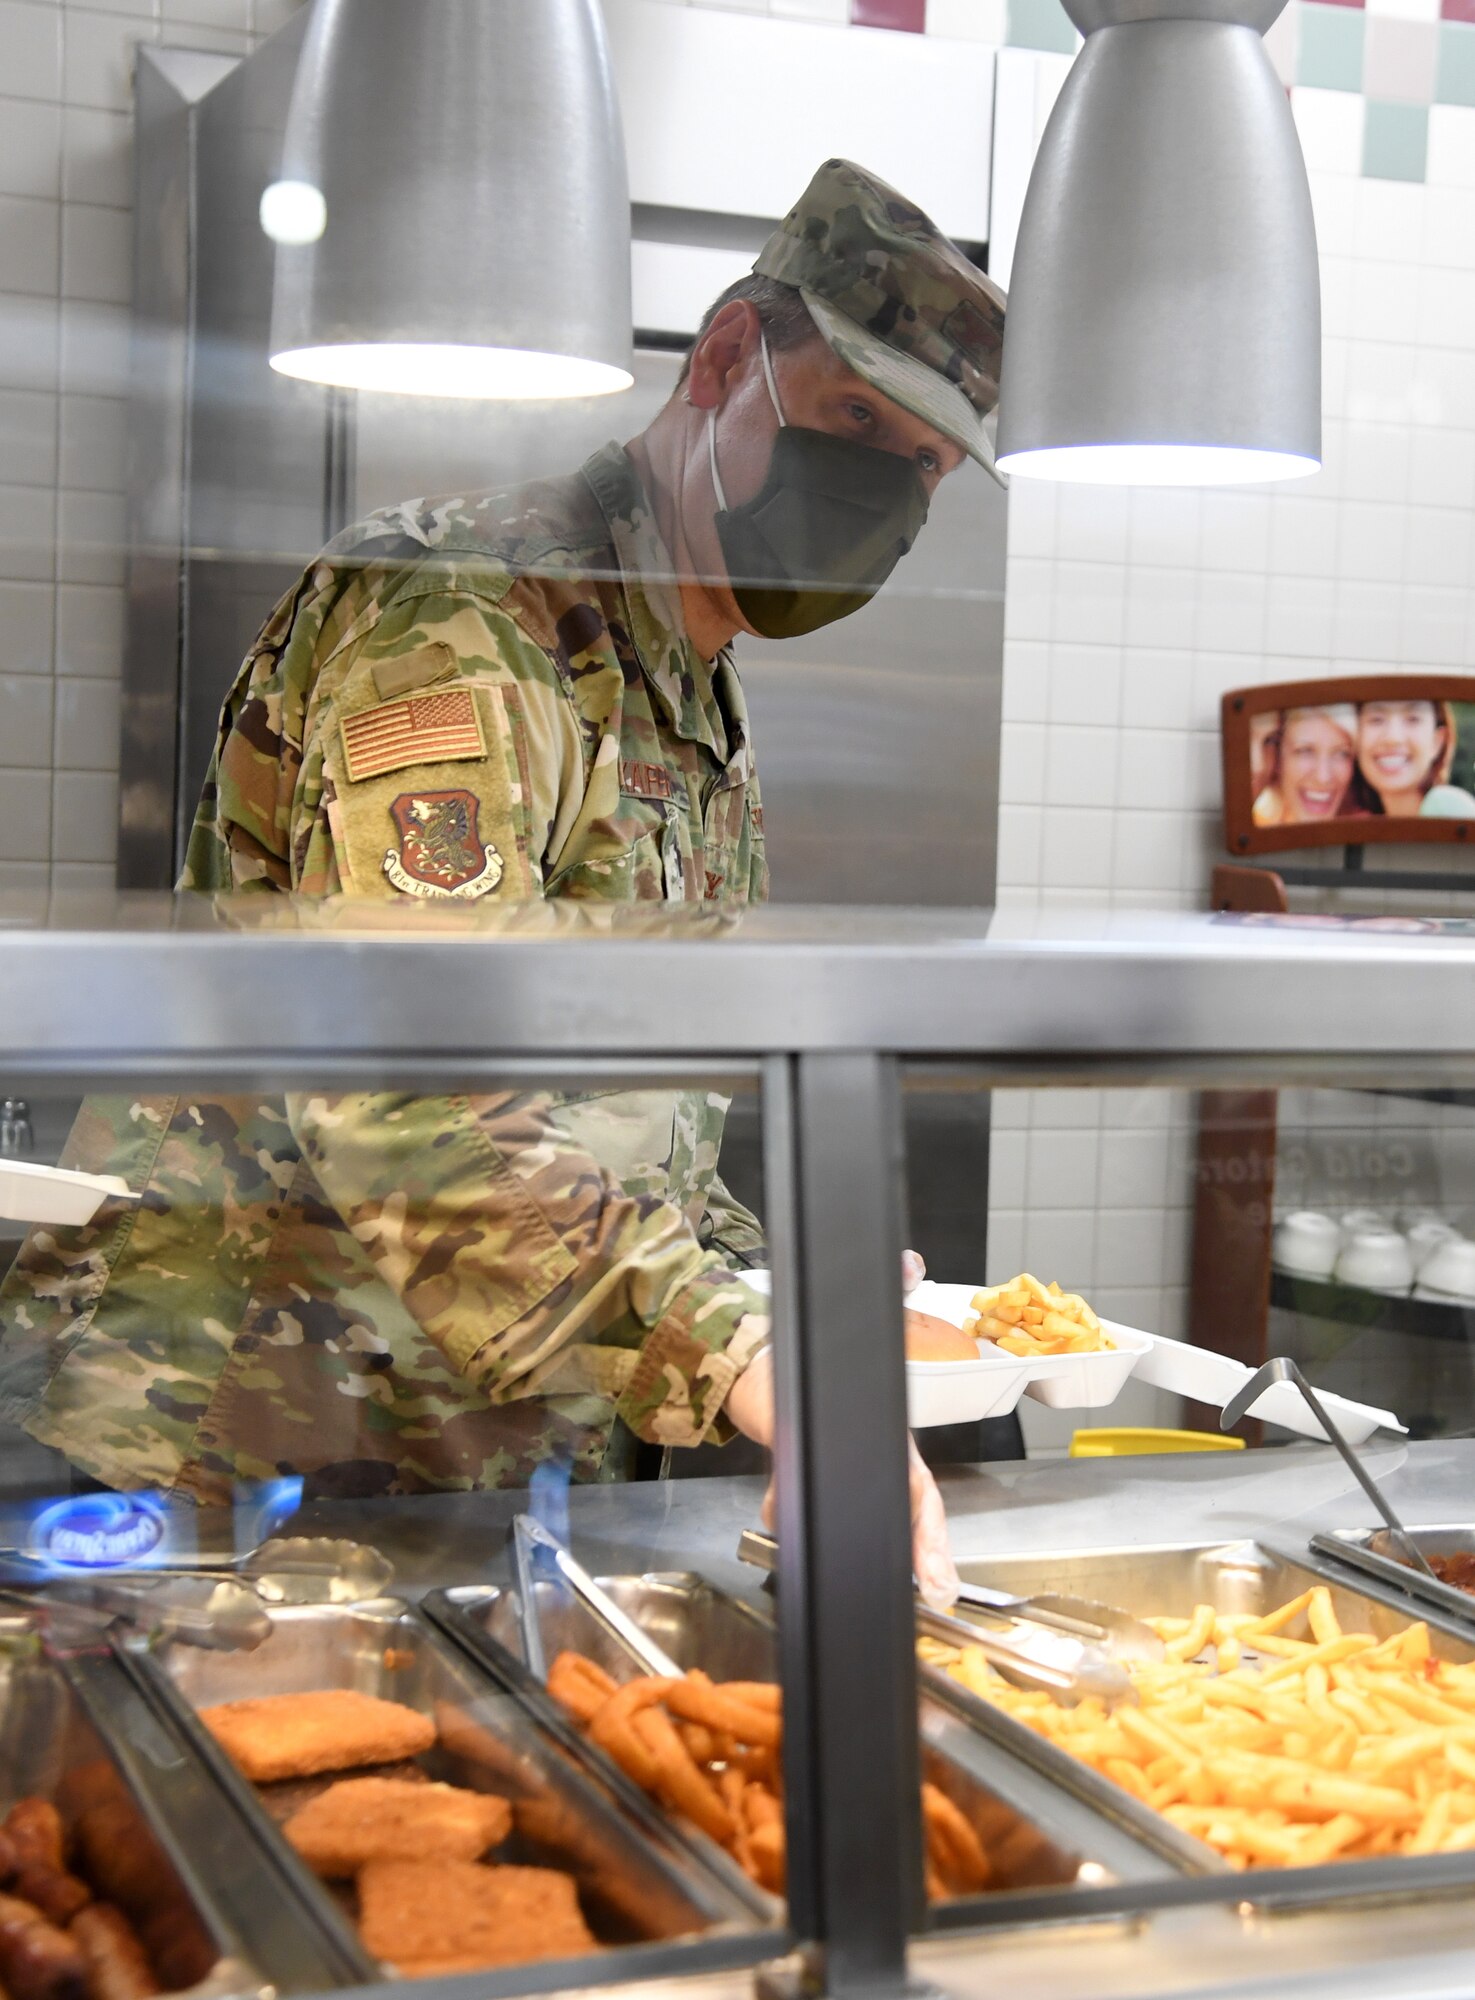 U.S. Air Force Col. James Kafer, 81st Training Wing vice commander, serves meals to Airmen inside the Azalea Dining Facility at Keesler Air Force Base, Mississippi, Sept. 18, 2020. As part of the Air Force's 73rd Birthday Celebration Week, Sept. 14-18, base leadership served meals to Airmen at the dining facilities. (U.S. Air Force photo by Kemberly Groue)